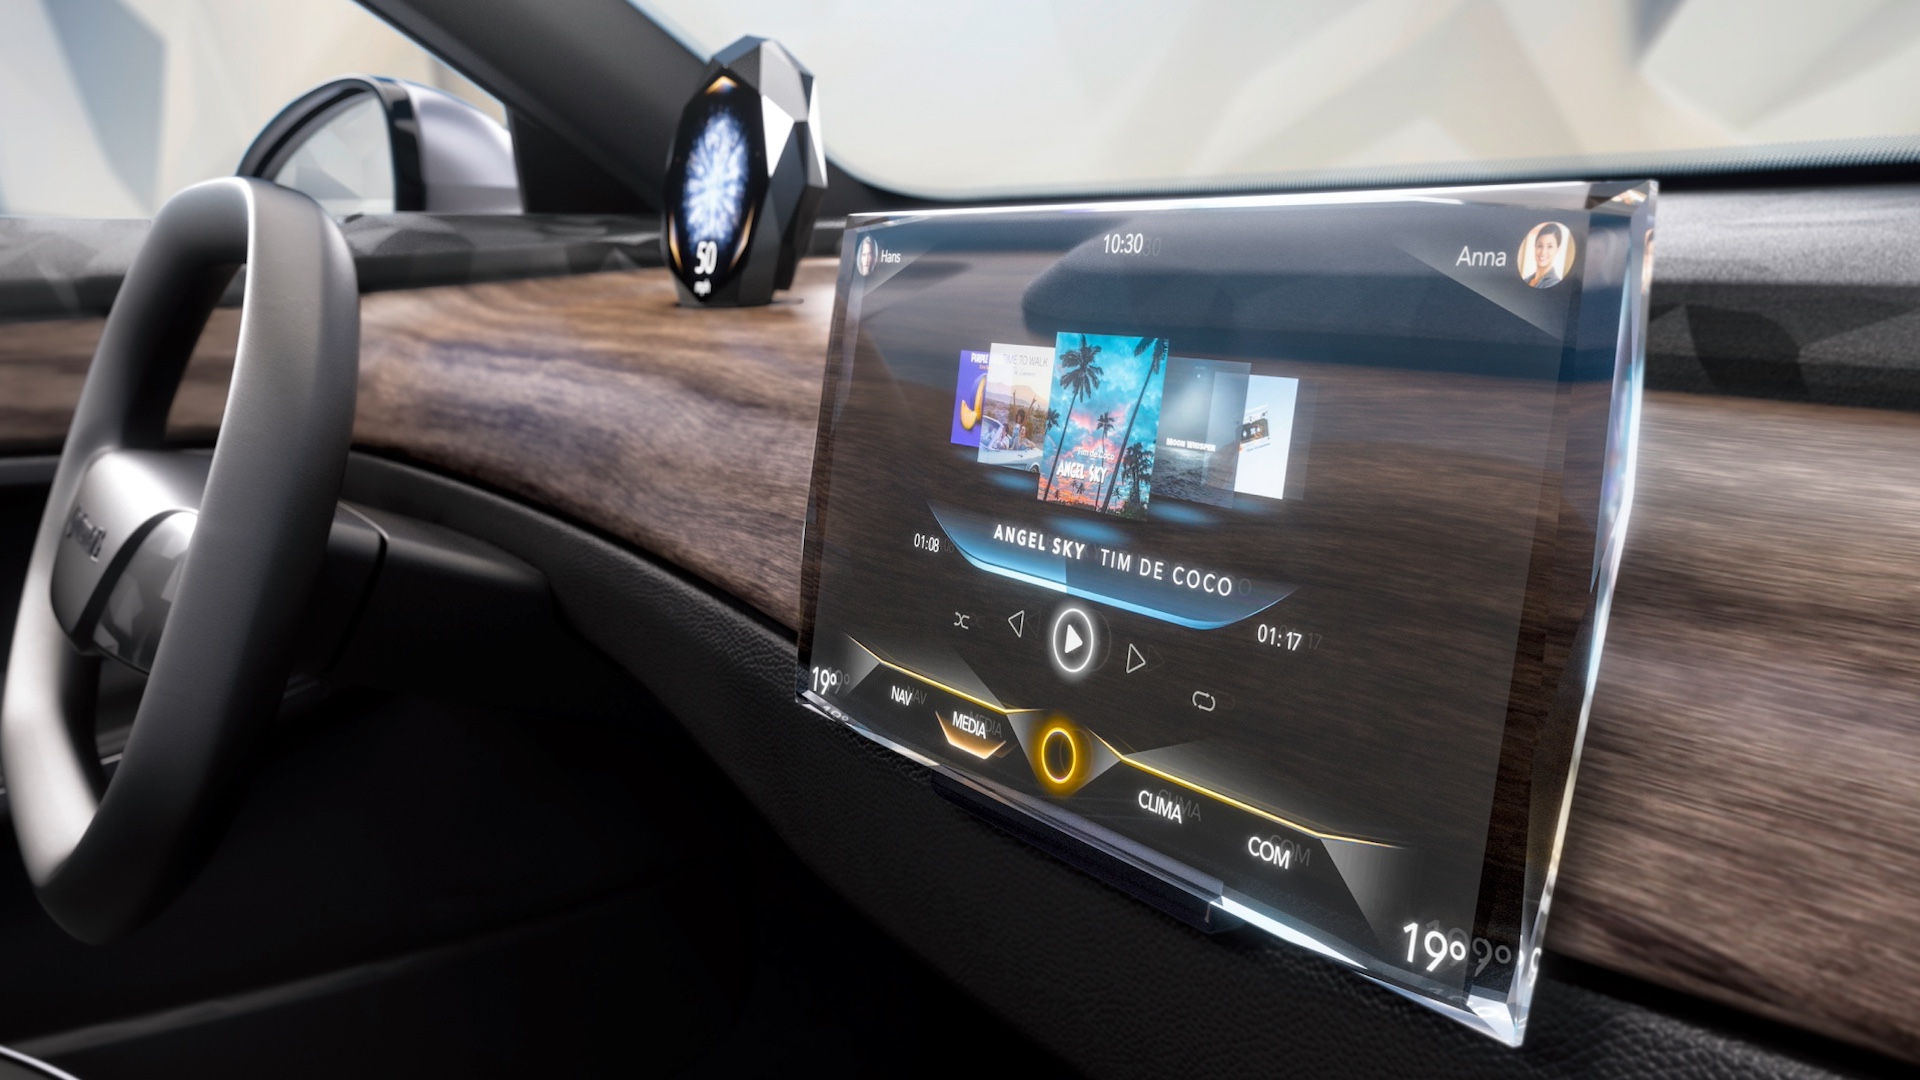 The Transparent Infotainment Screen Is Here and It’s Made of Swarovski Crystal